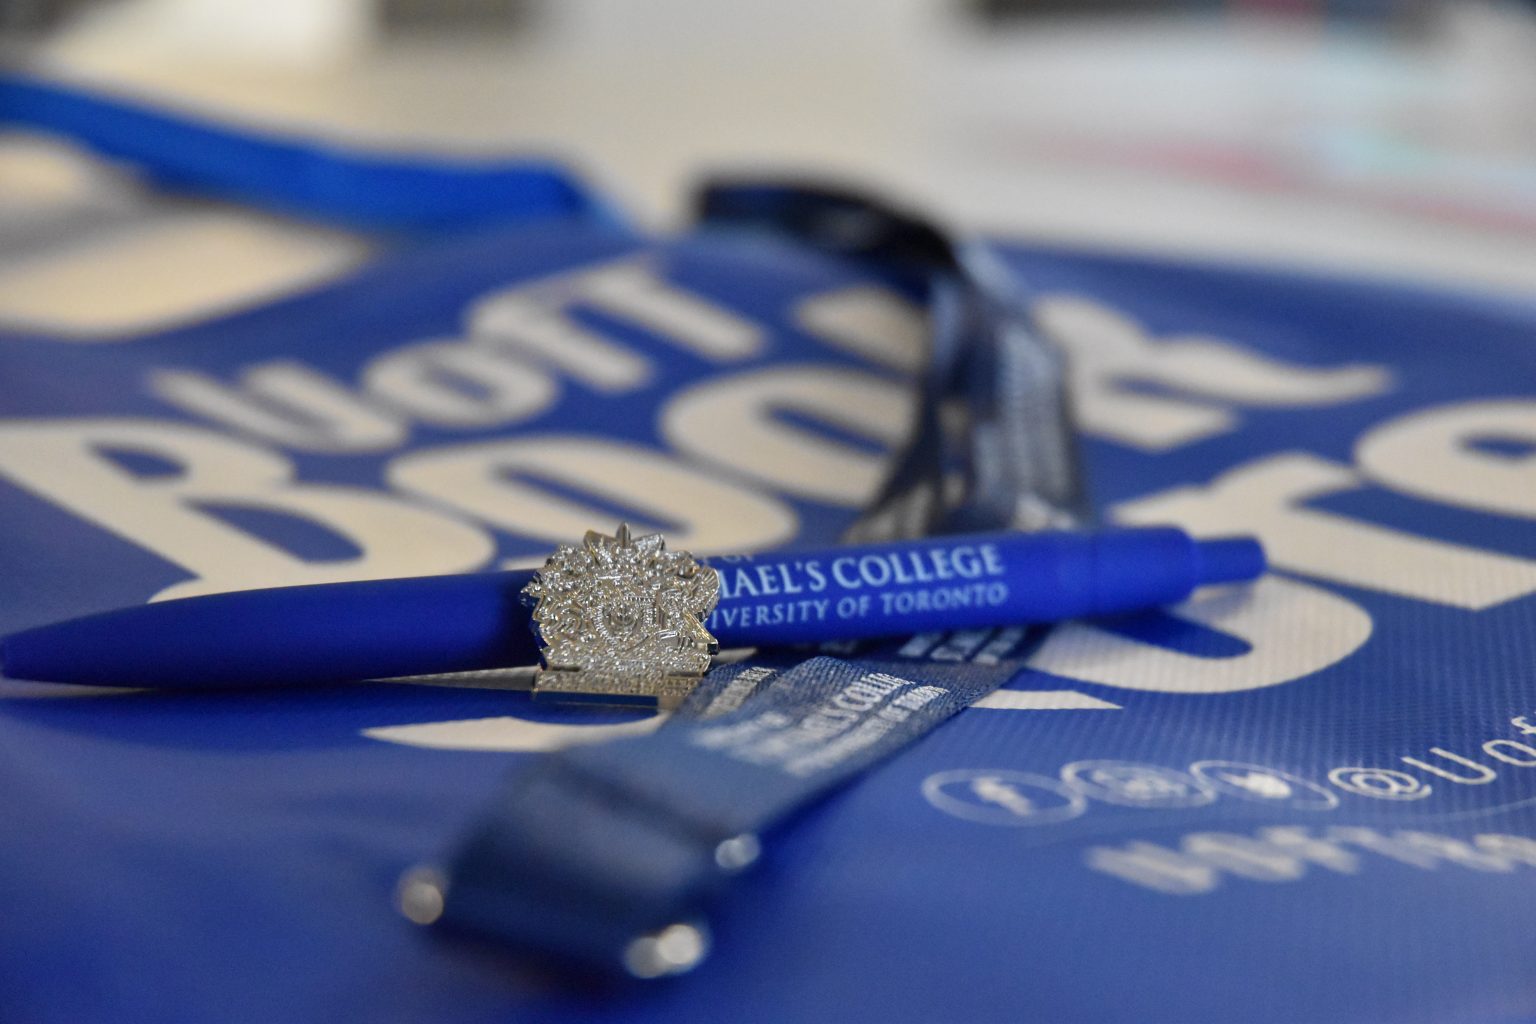 Close focus photograph of a small silver pin shaped like the University of St. Michael's College crest, a pen with the USMC logo, and a  blue lanyard all sitting on a U of T Book Store tote bag.